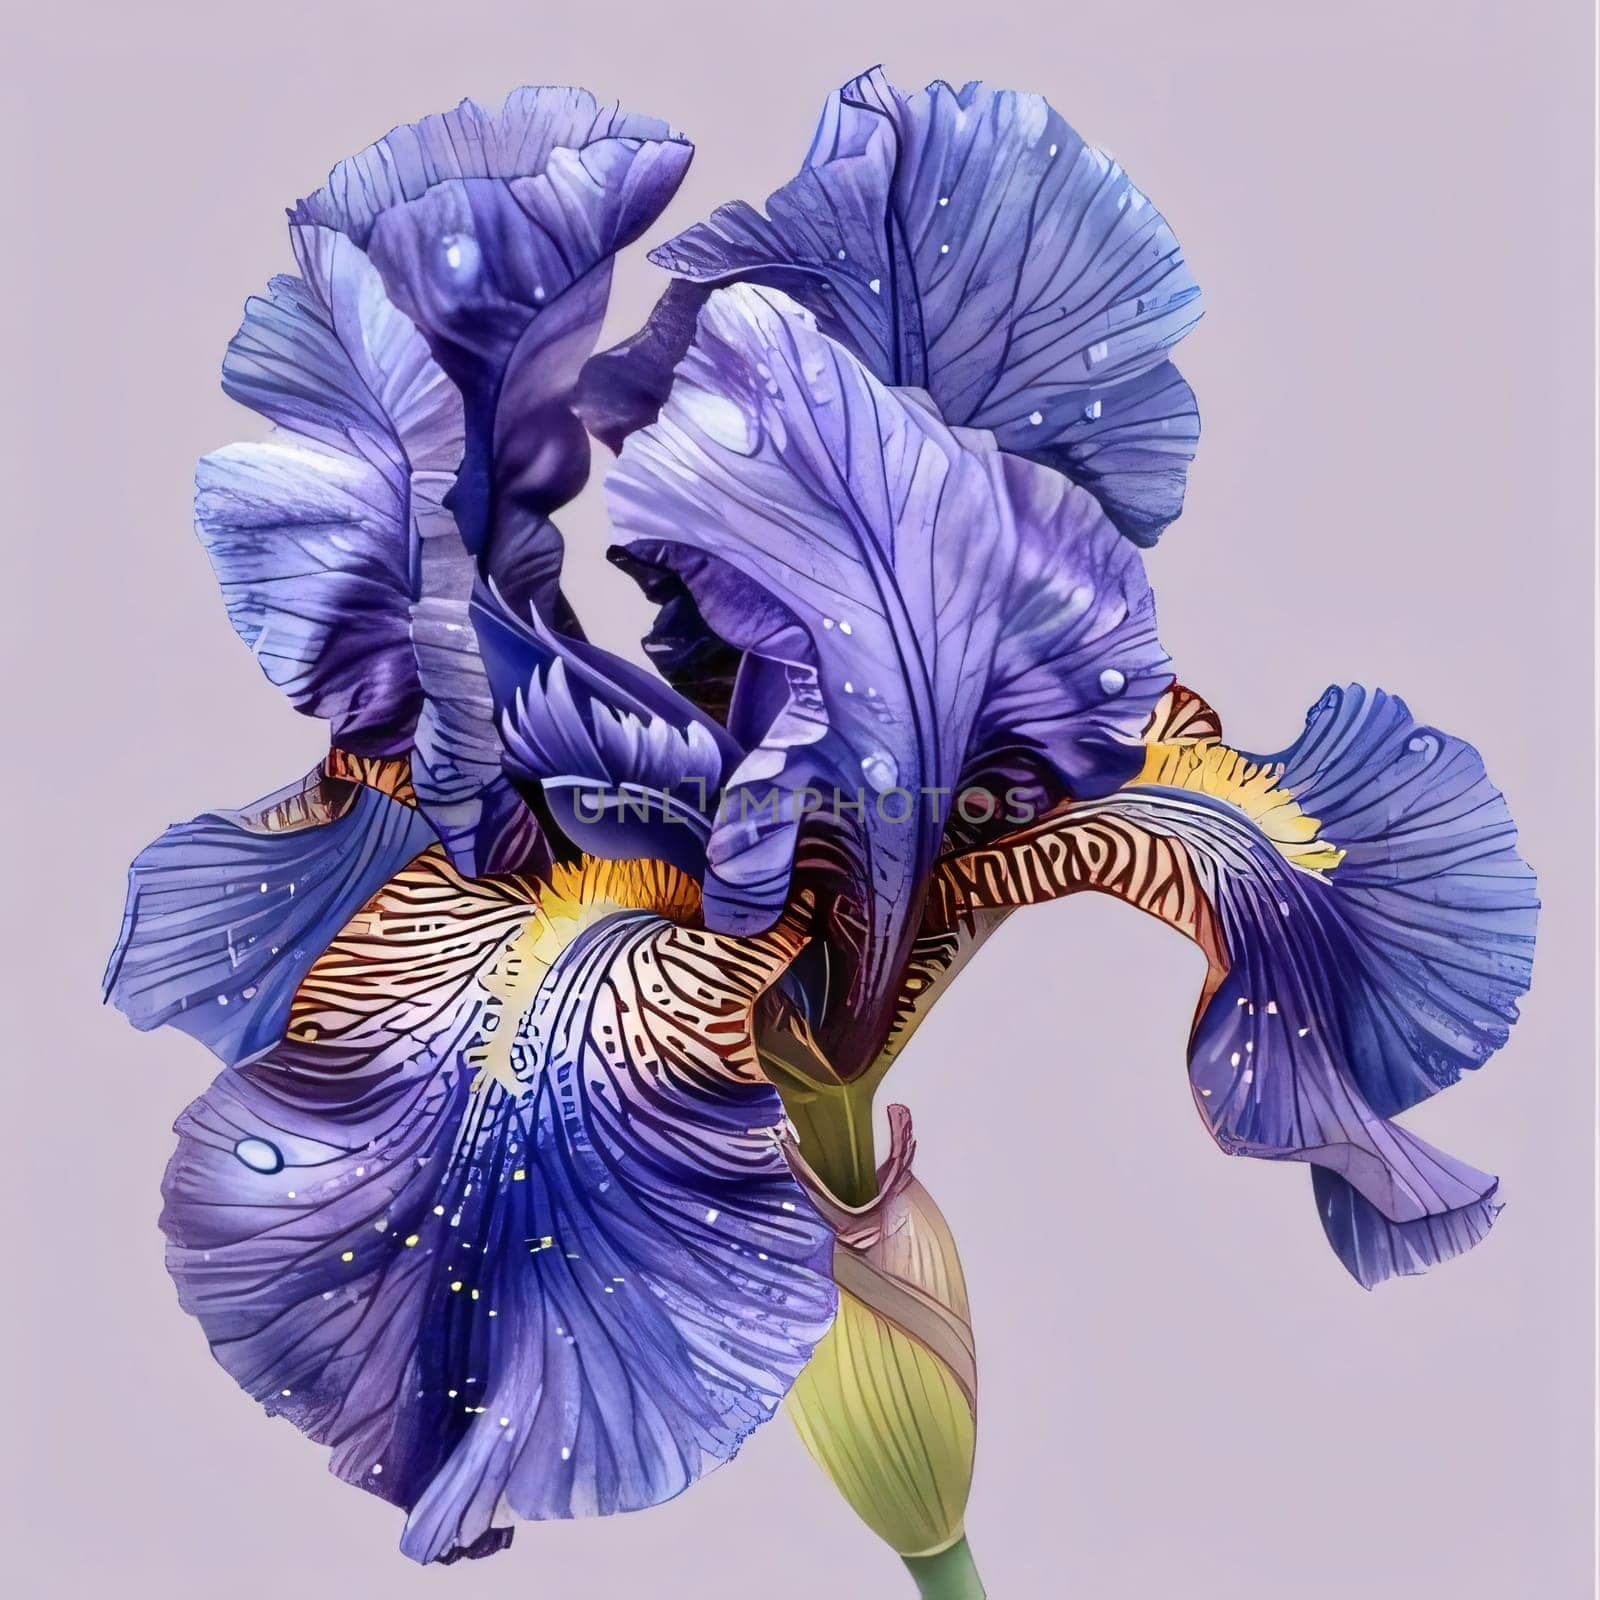 Blue iris flower on a gray isolated background. Flowering flowers, a symbol of spring, new life. by ThemesS